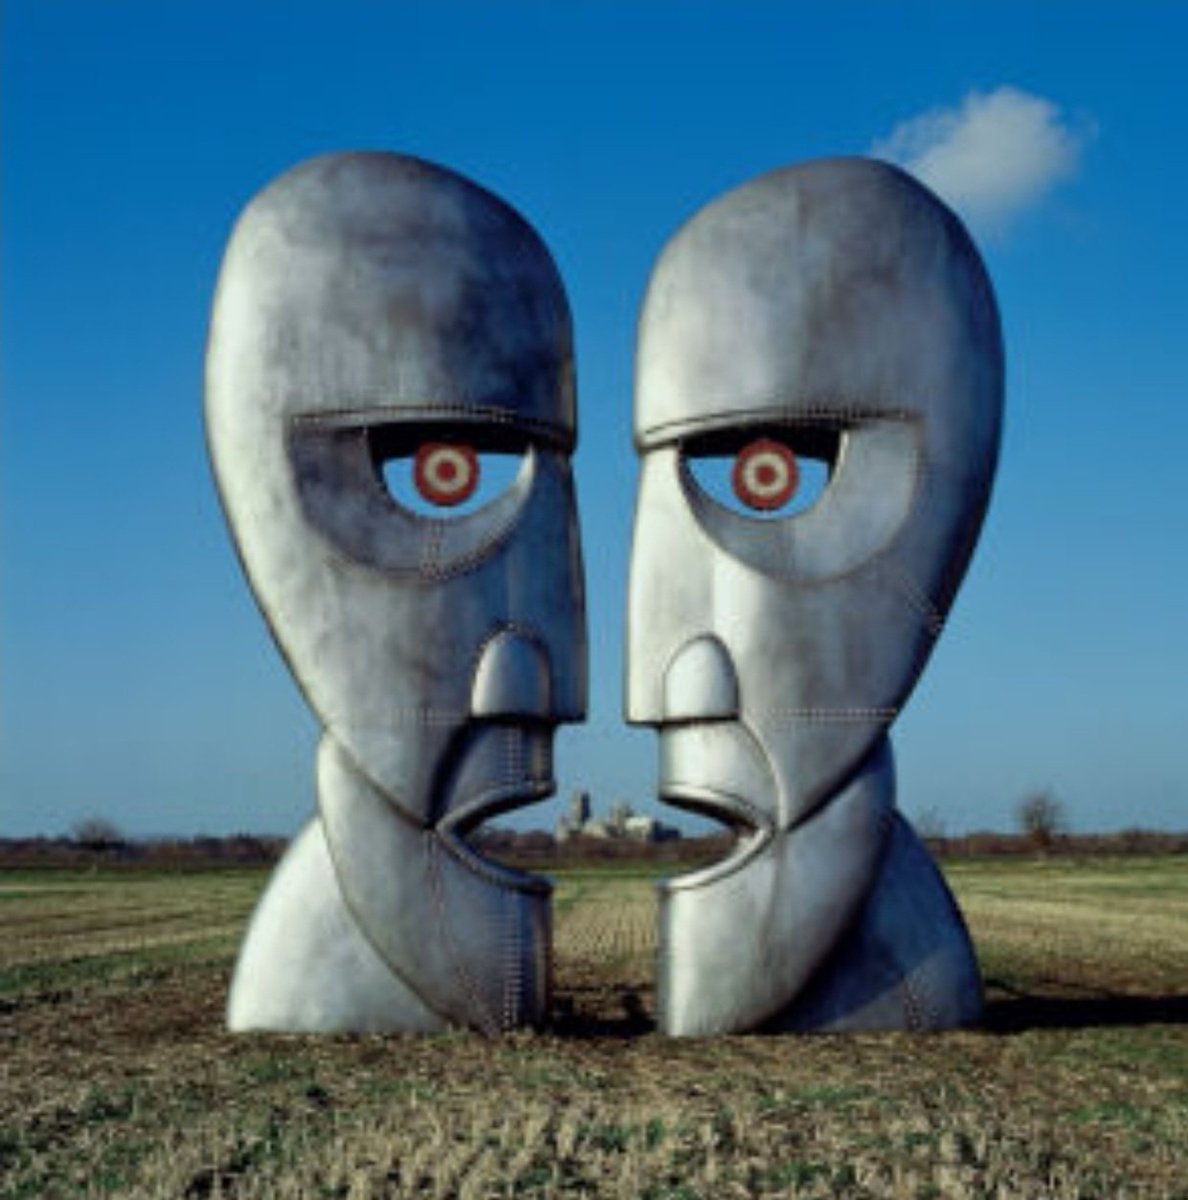 #30YearsAgo today @PinkFloyd released their 14th album #TheDivisionBell.  It was written by #DavidGilmour & #RichardWright w/ Polly Samson. It featured Wright on lead vocals for the 1st time since DSOTM. #StormThorgerson did the iconic album artwork. #GuyPratt on bass.